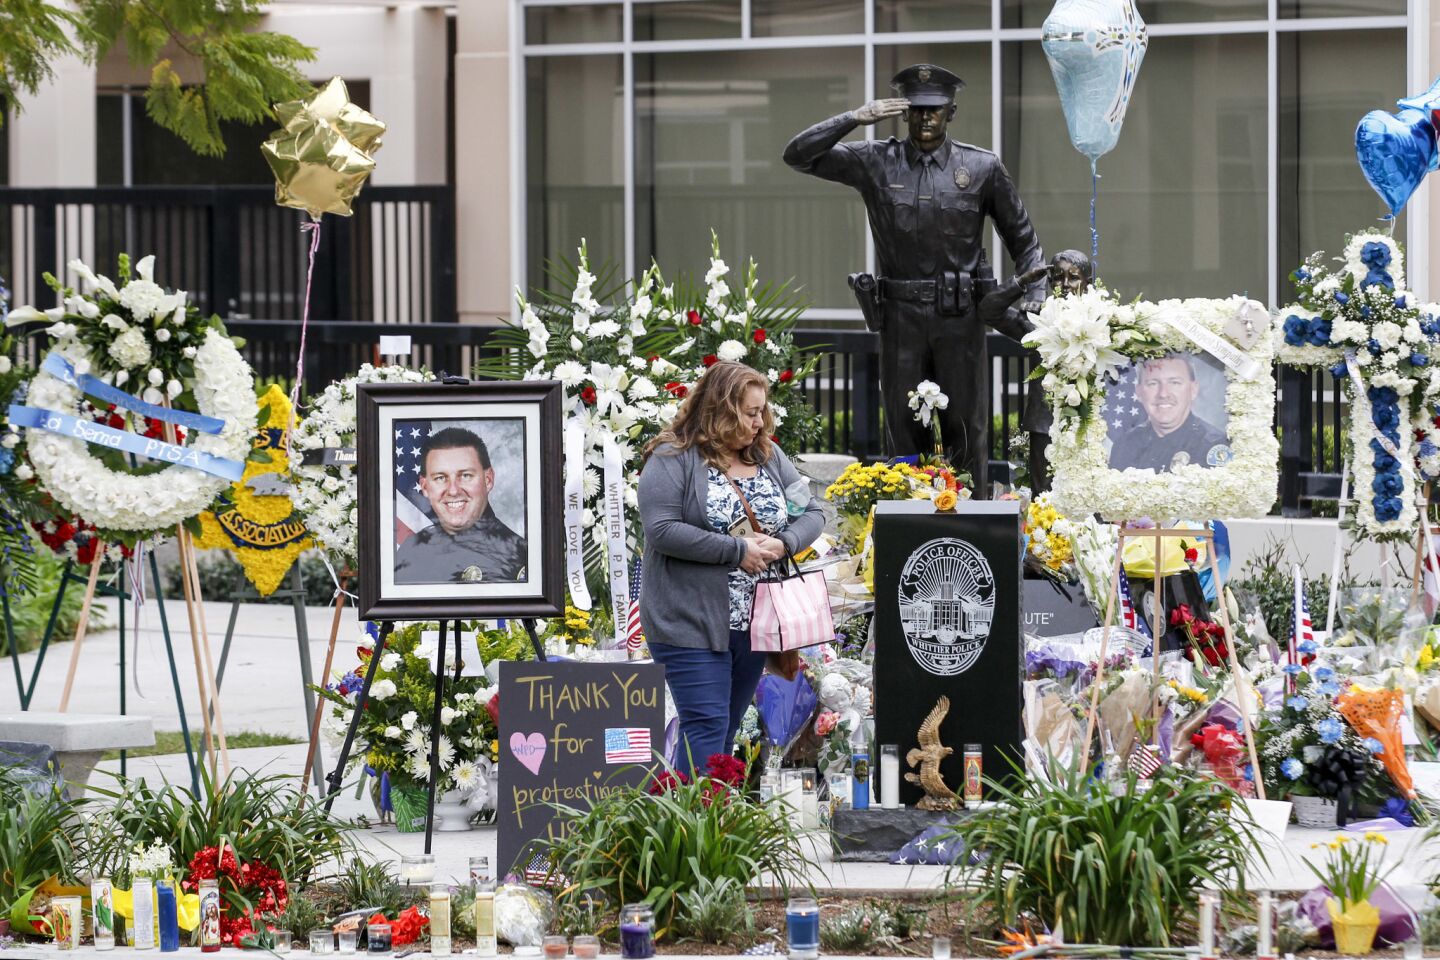 People visit a make shift memorial for slain Whittier police officer, Keith Boyer, in front of police station to pay their respects.